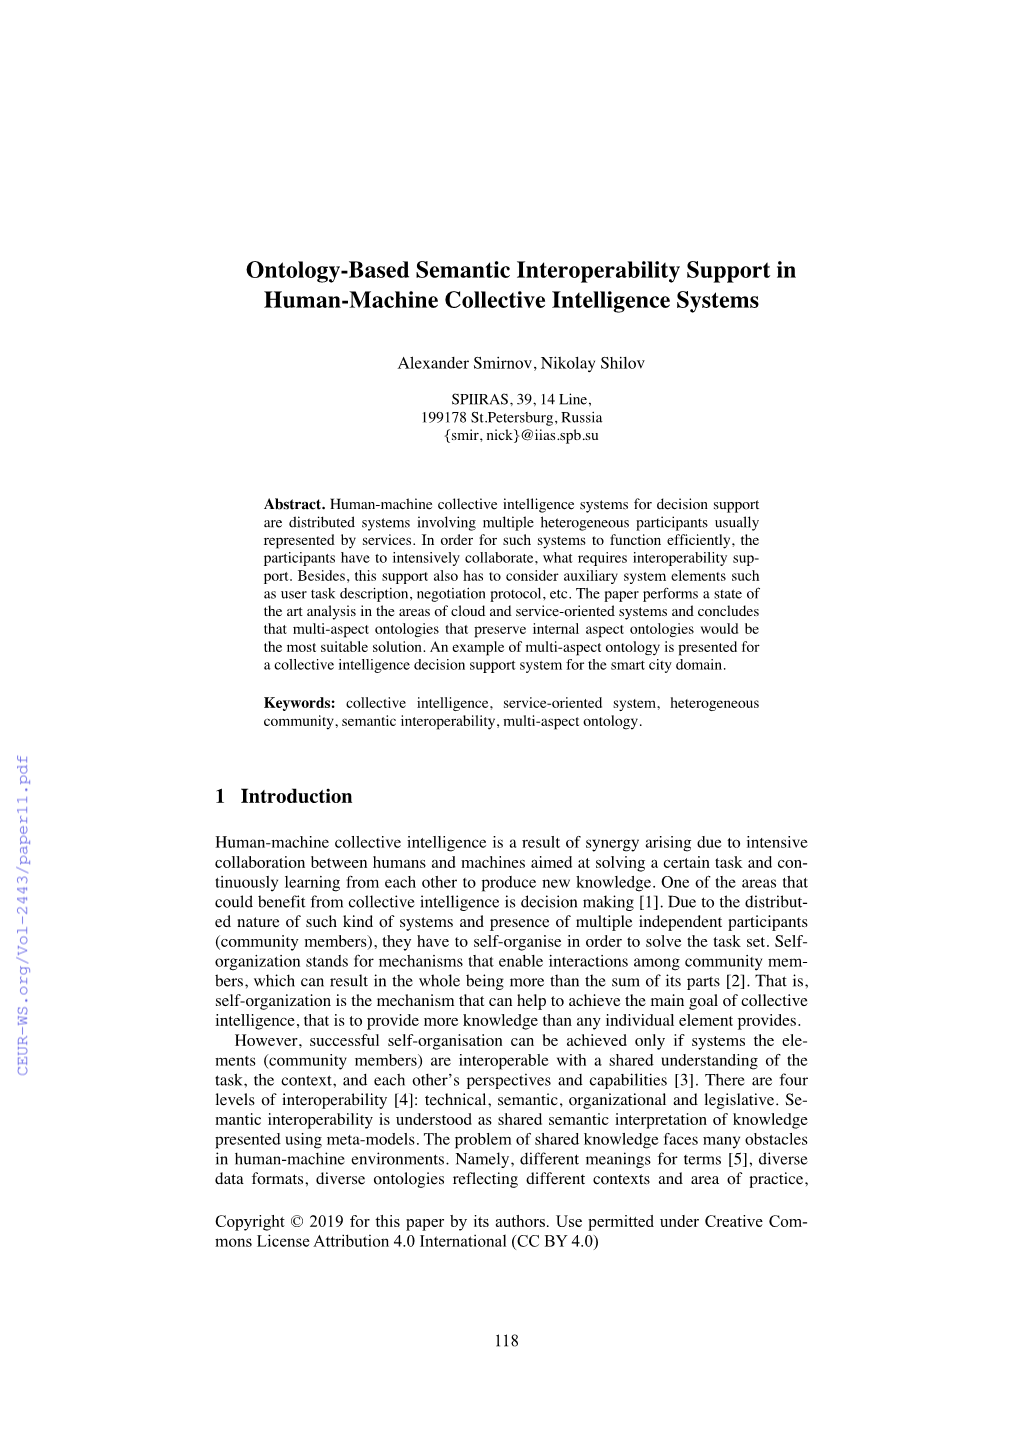 Ontology-Based Semantic Interoperability Support in Human-Machine Collective Intelligence Systems